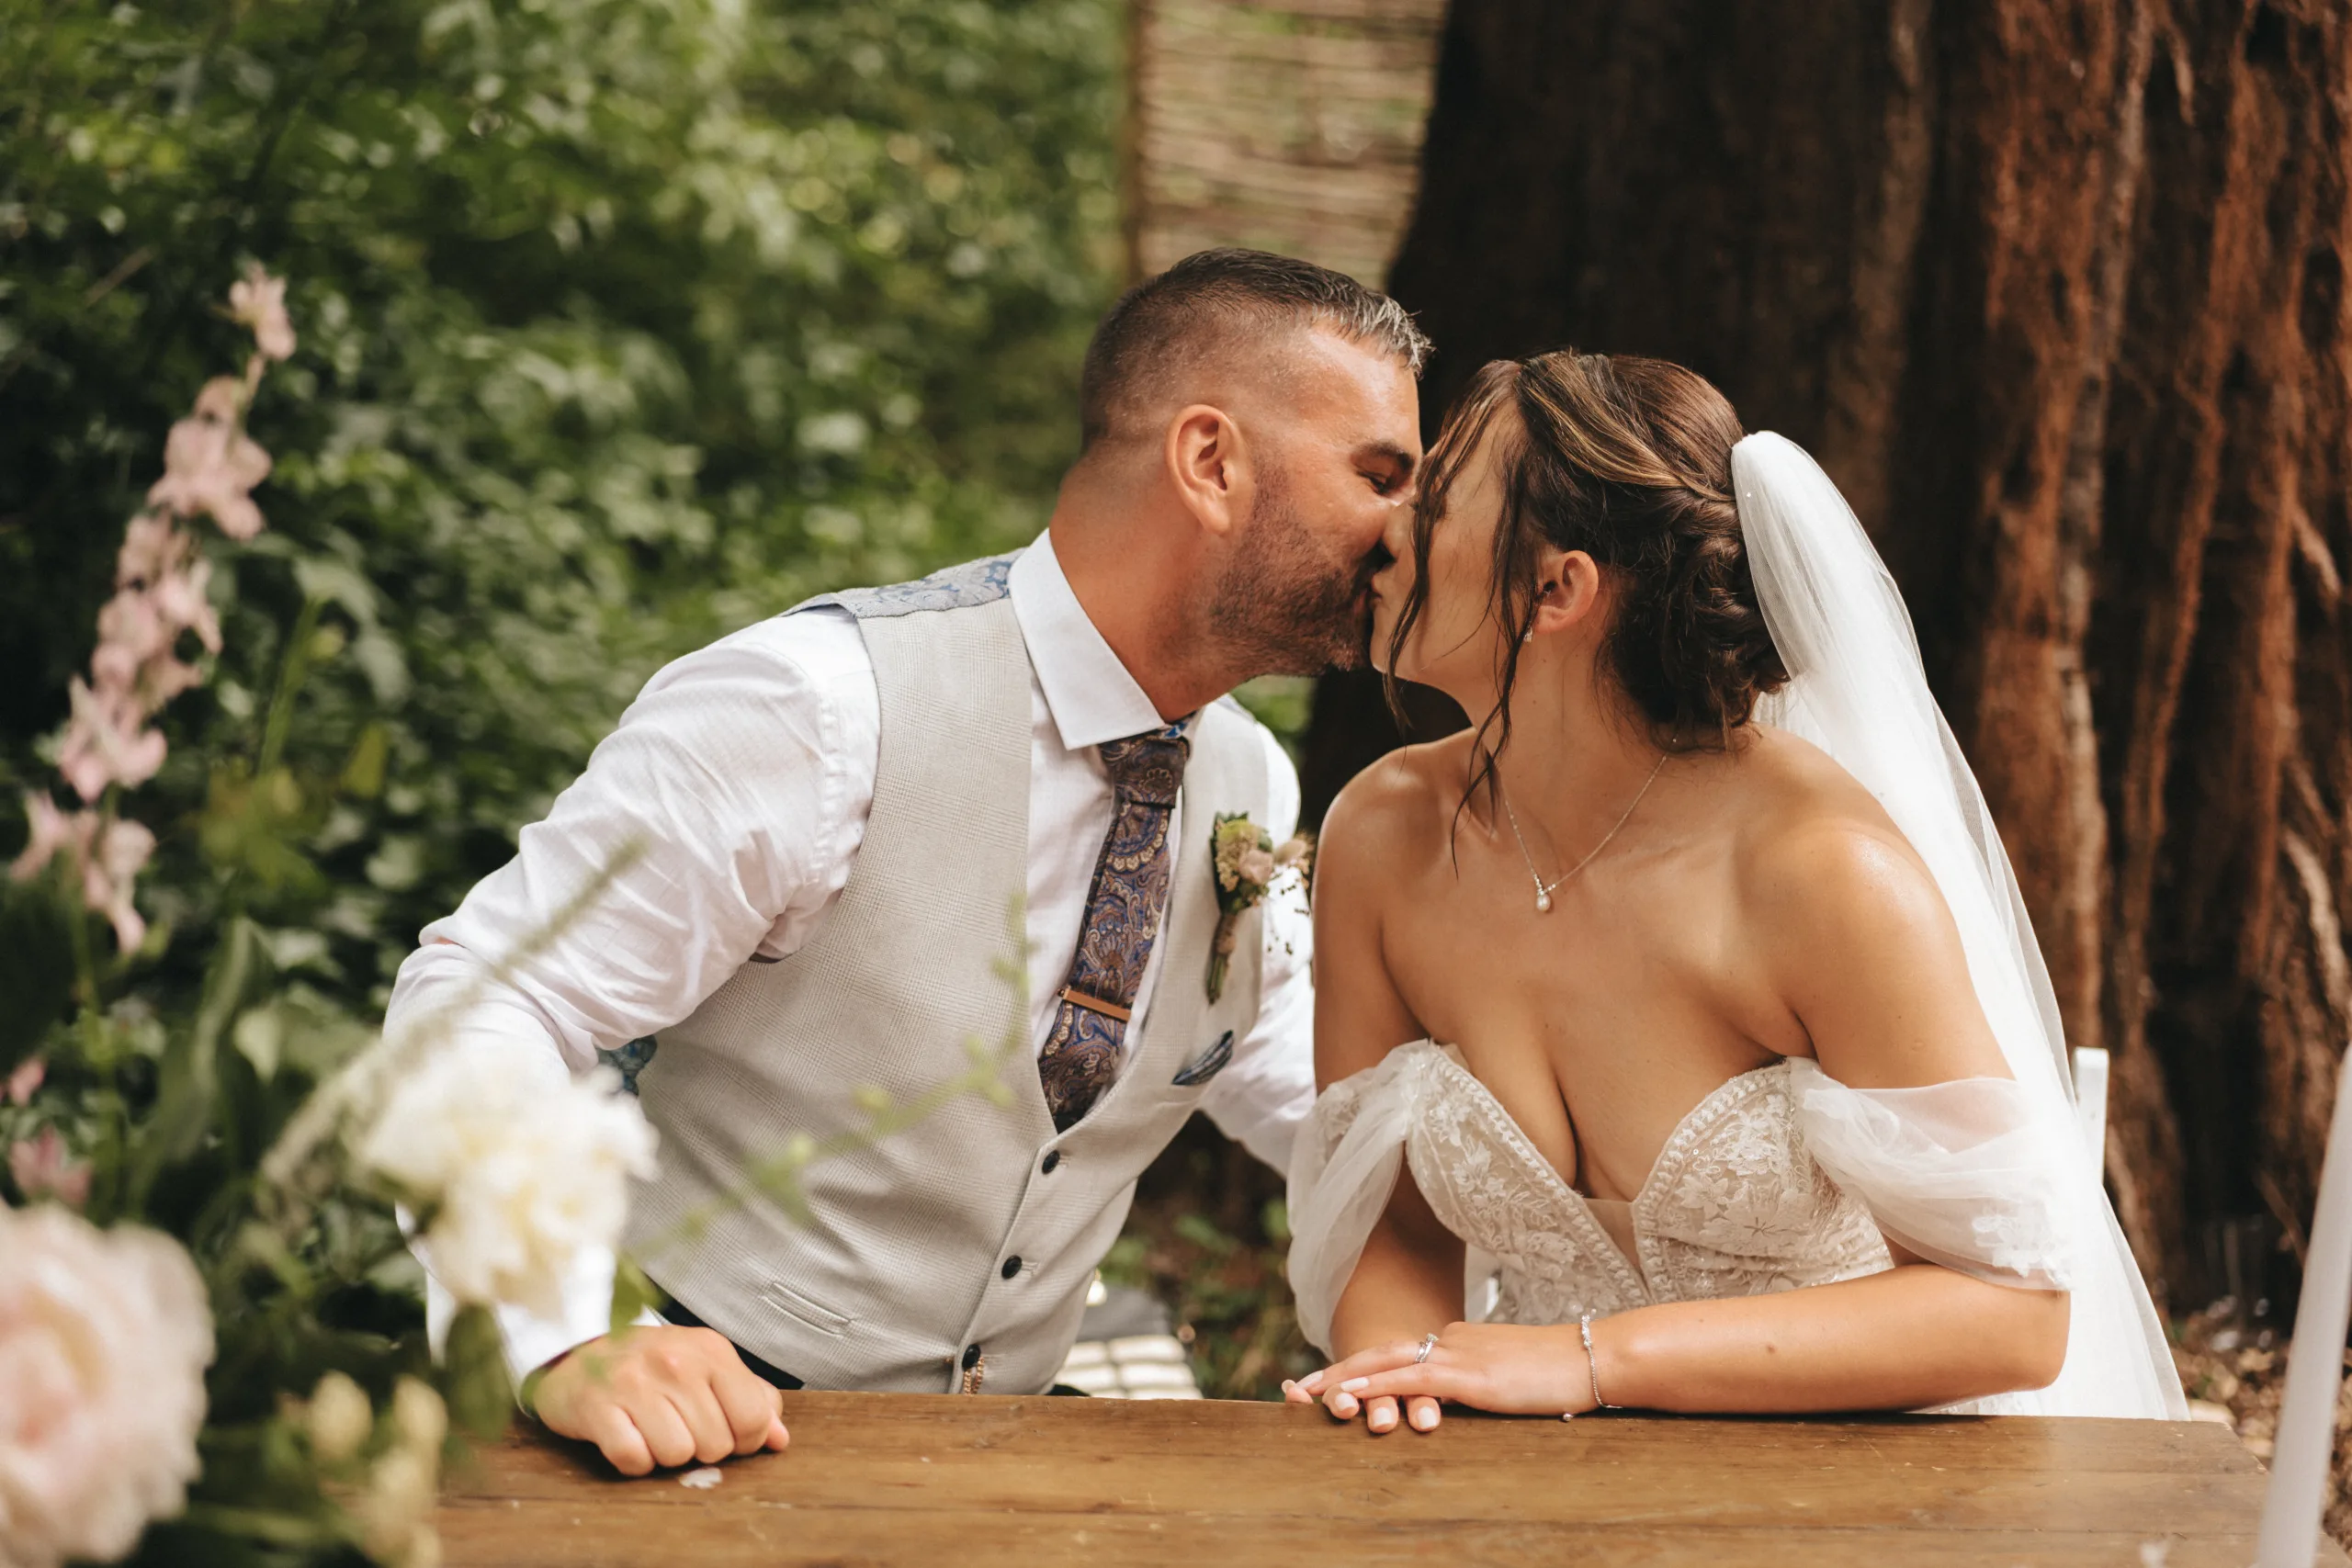 A bride and groom kissing at a wooden table in a picturesque setting, captured by a Lincolnshire photographer.